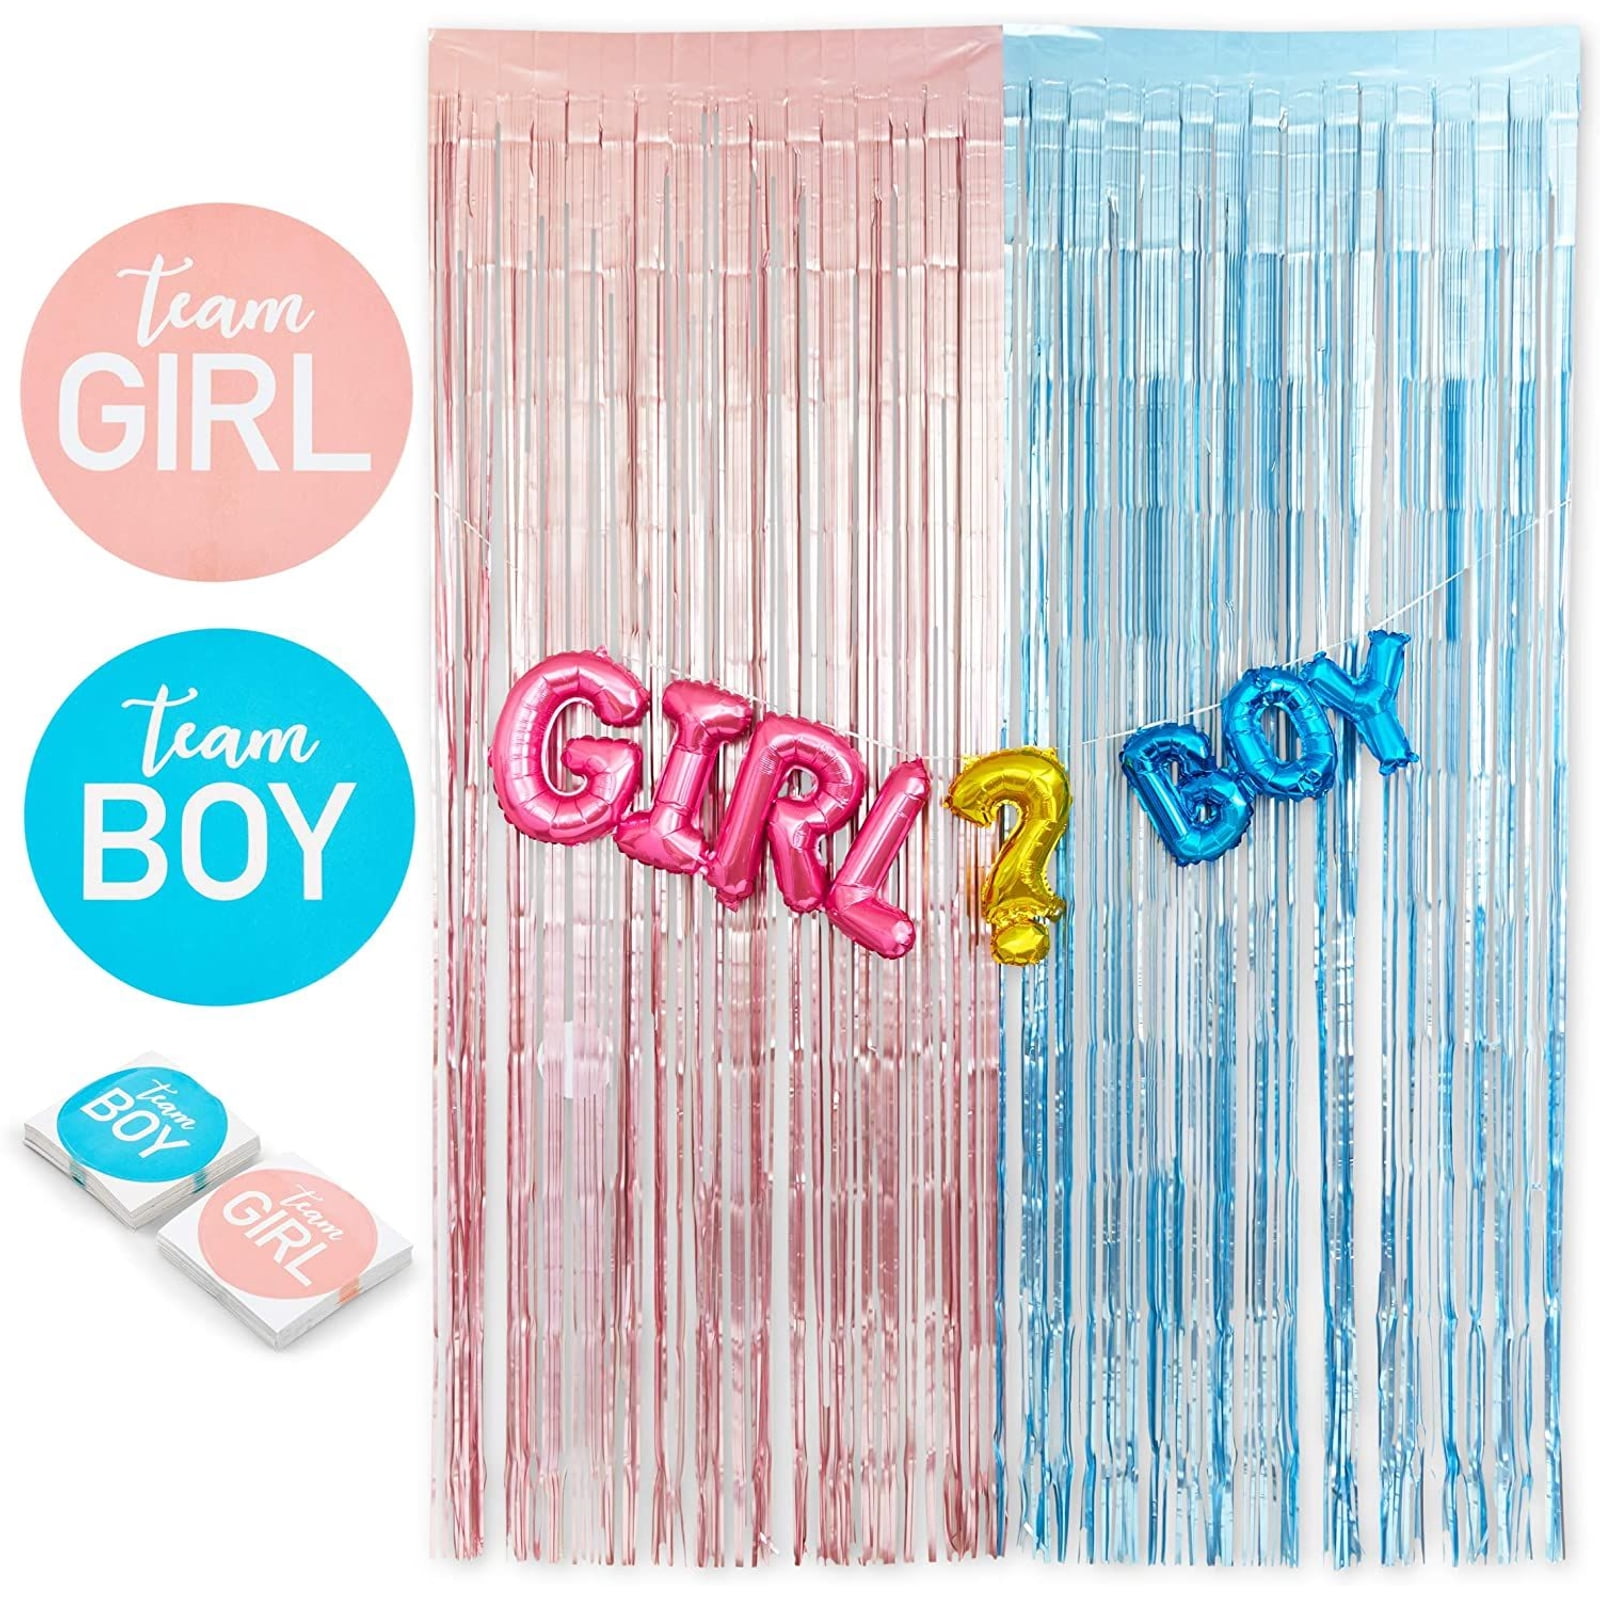 85pcs Gender Reveal Party Decorations Set - Pink & Blue Metallic Fringe Curtains Tinsel Backdrop, Balloons Banner & 80 Team Boy Team Girl Voting Game Stickers